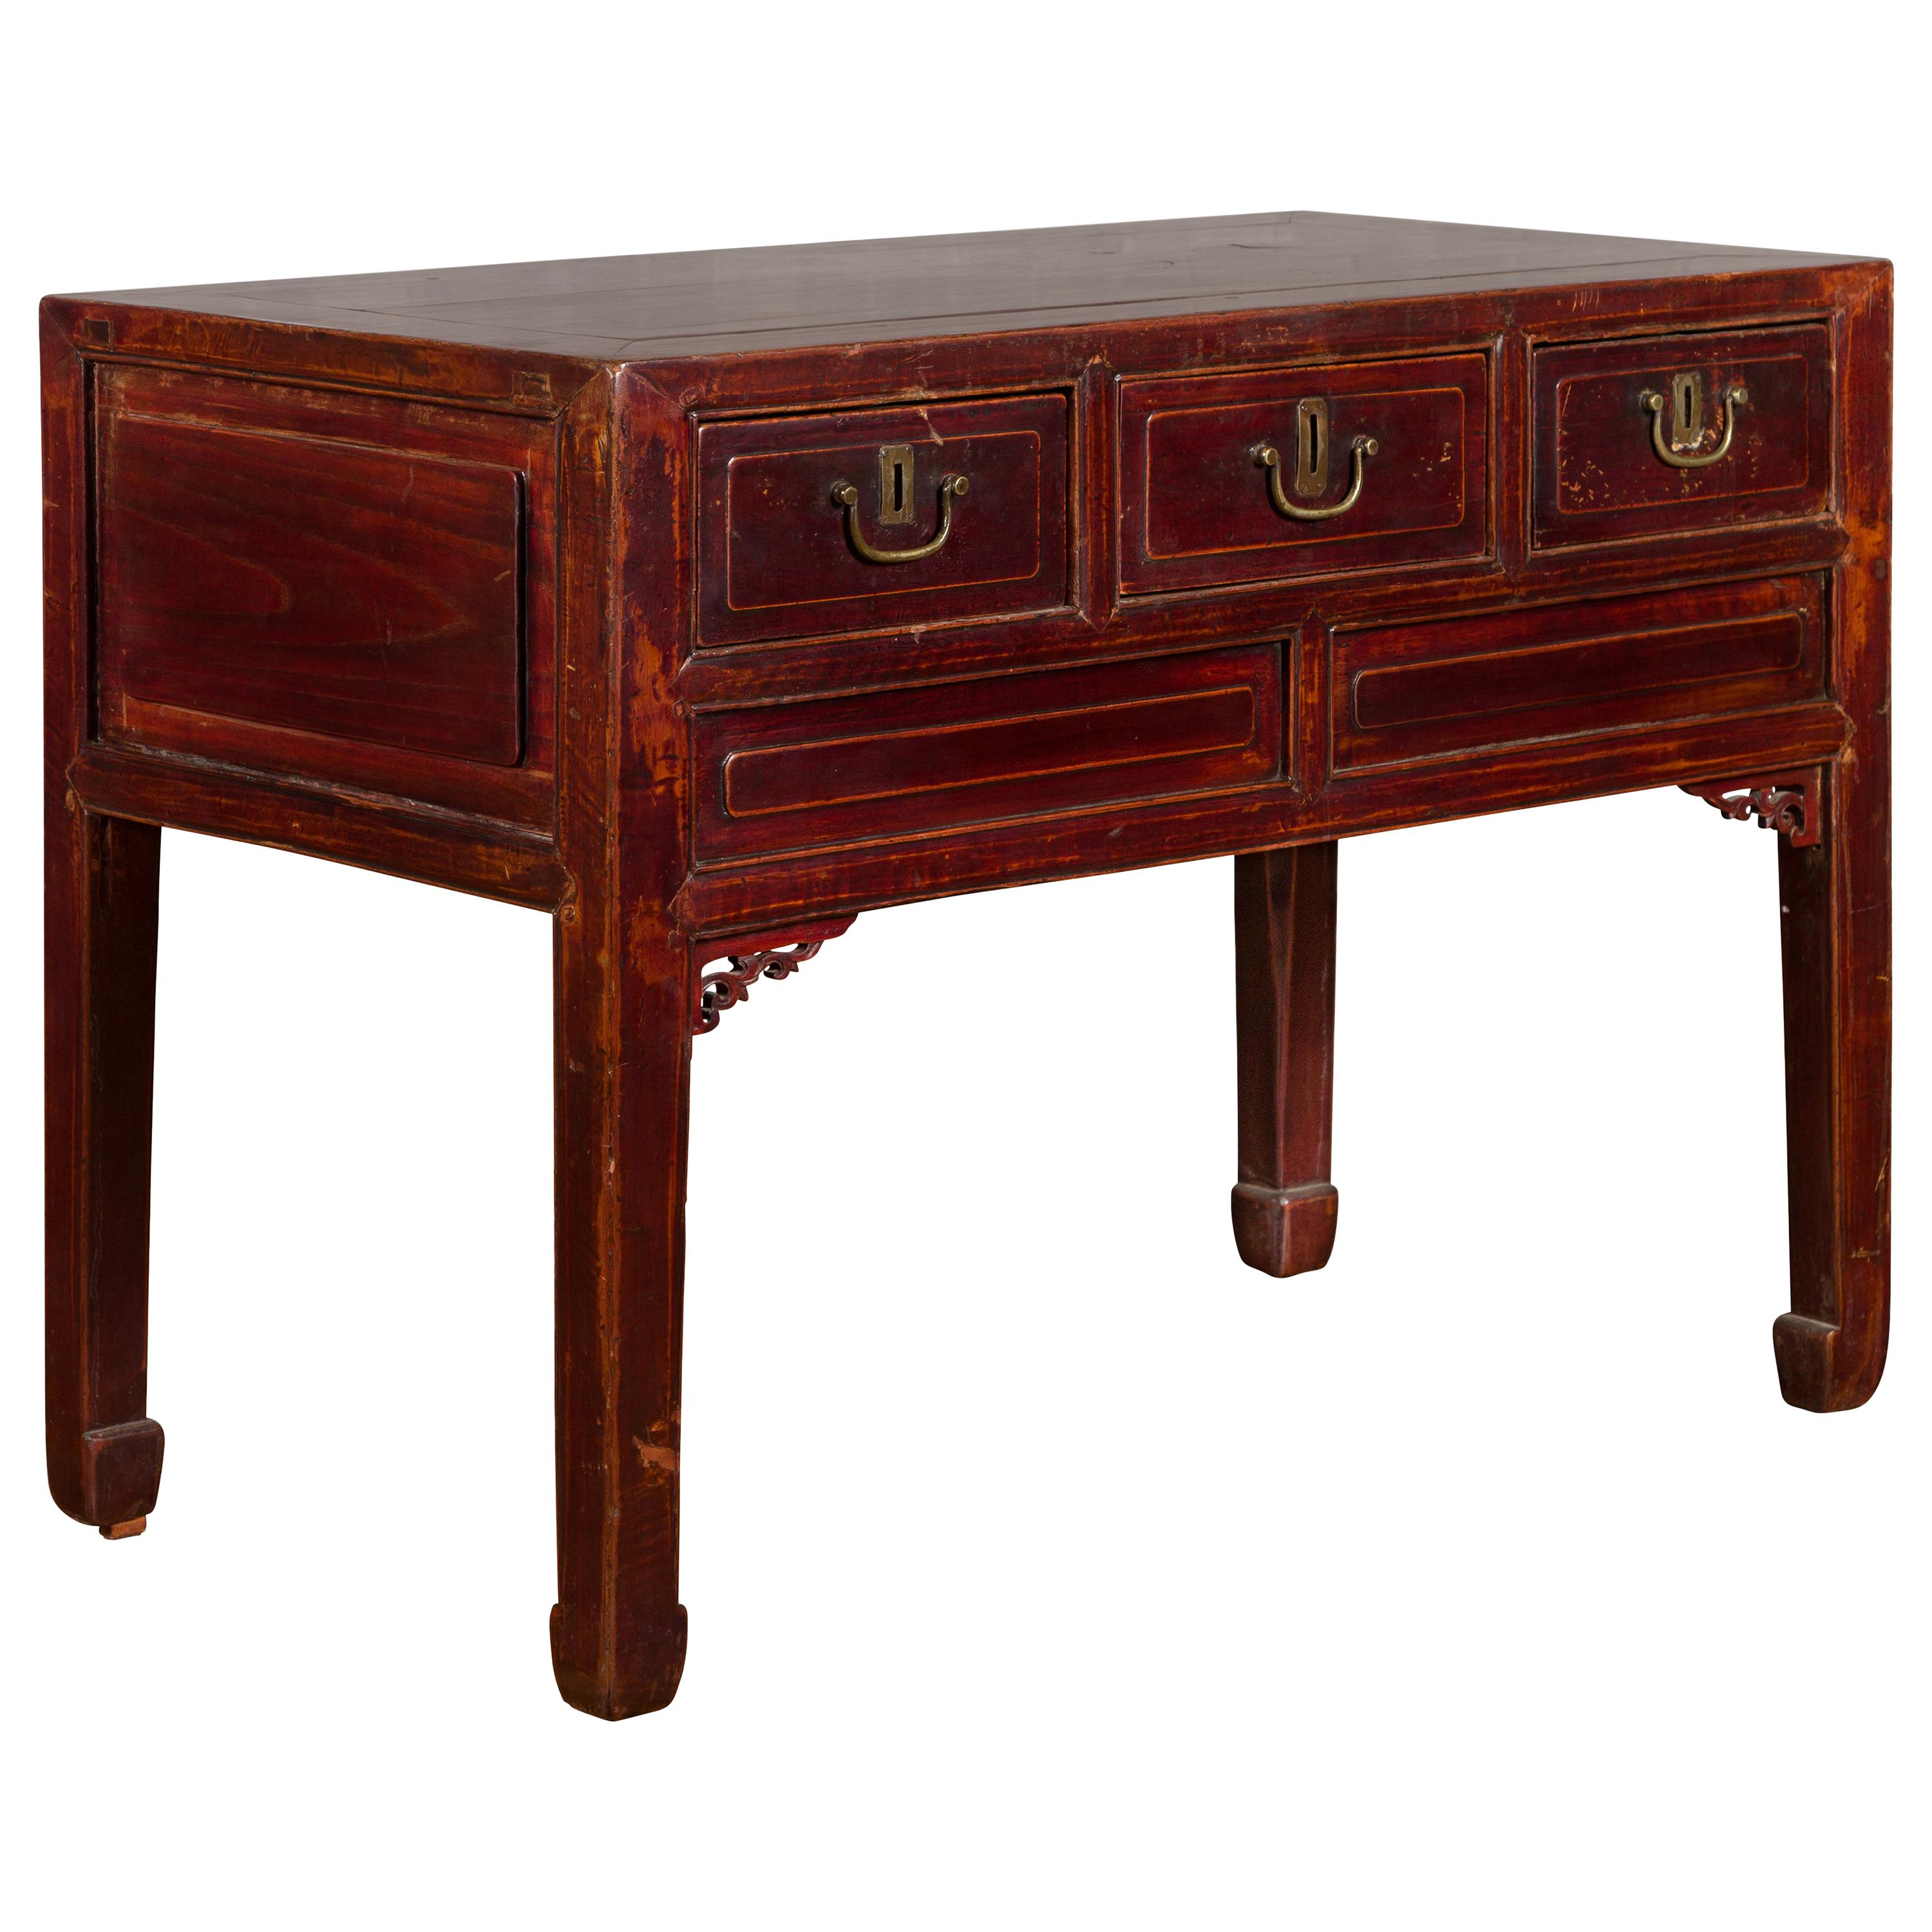 Chinese Antique Console Table with Drawers, Horse Hoof Legs and Dark Red Patina For Sale